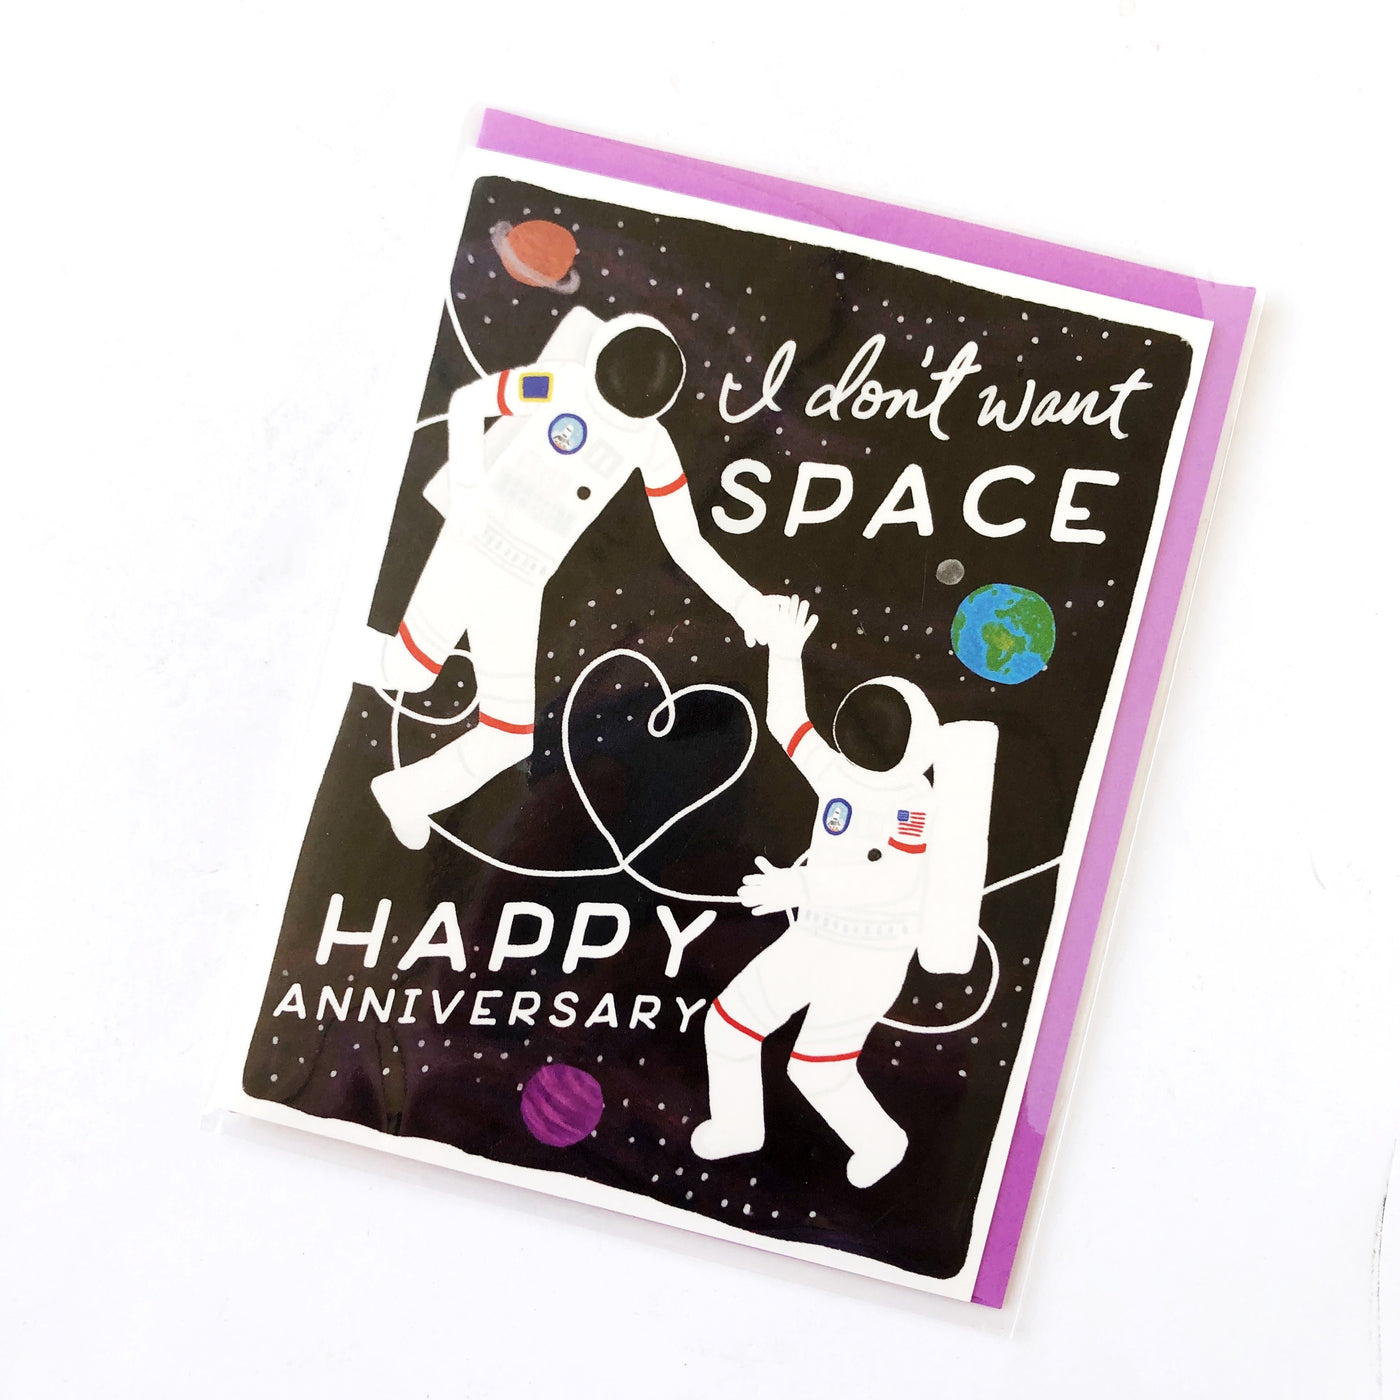 I Don't Want Space Greeting Card - Barque Gifts